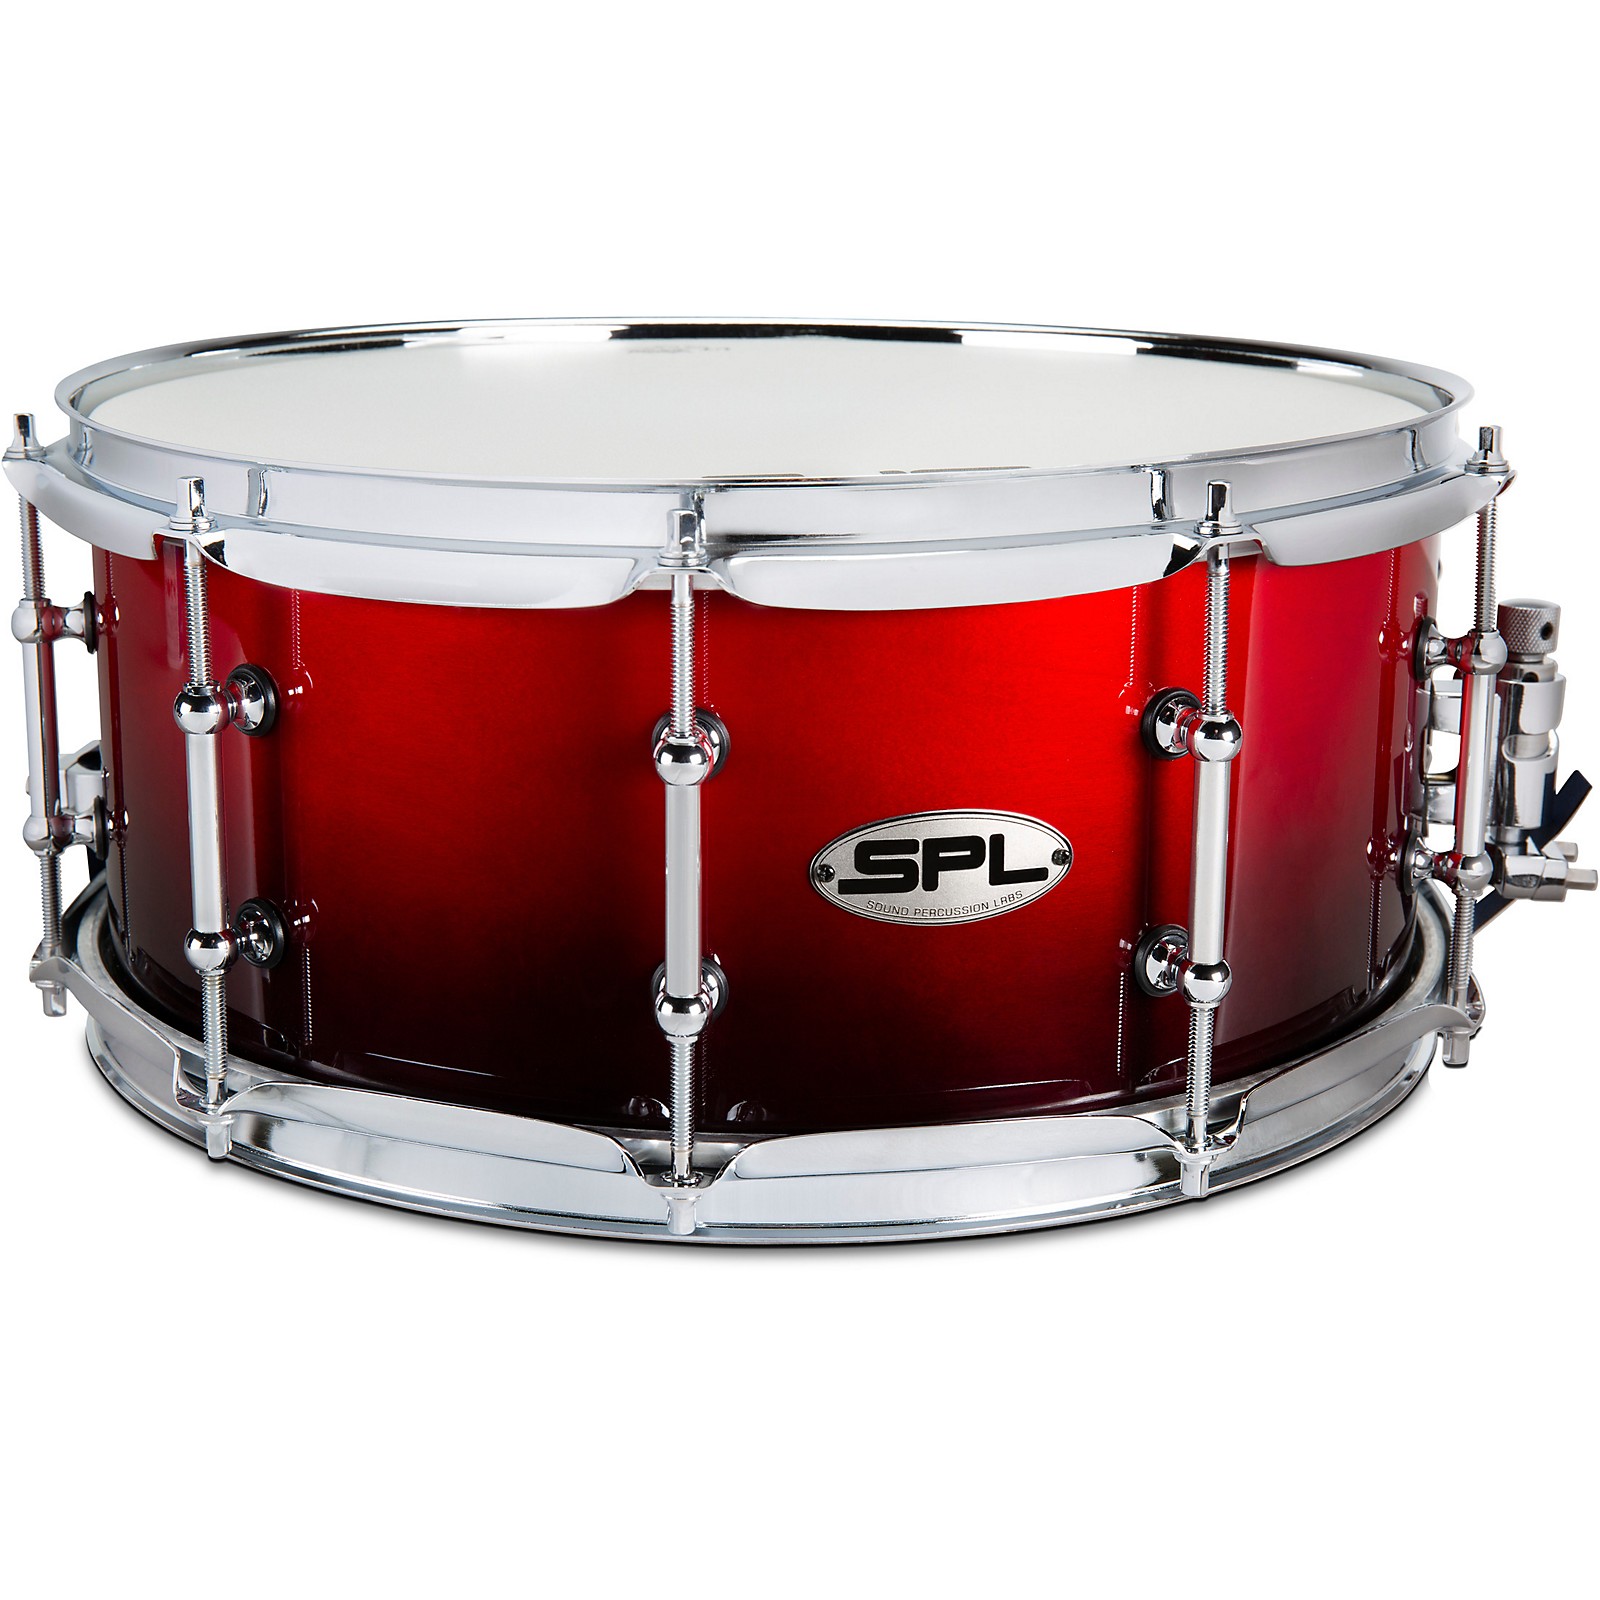 Sound Percussion Labs 468 Series Snare Drum 14 x 6 in. Scarlet